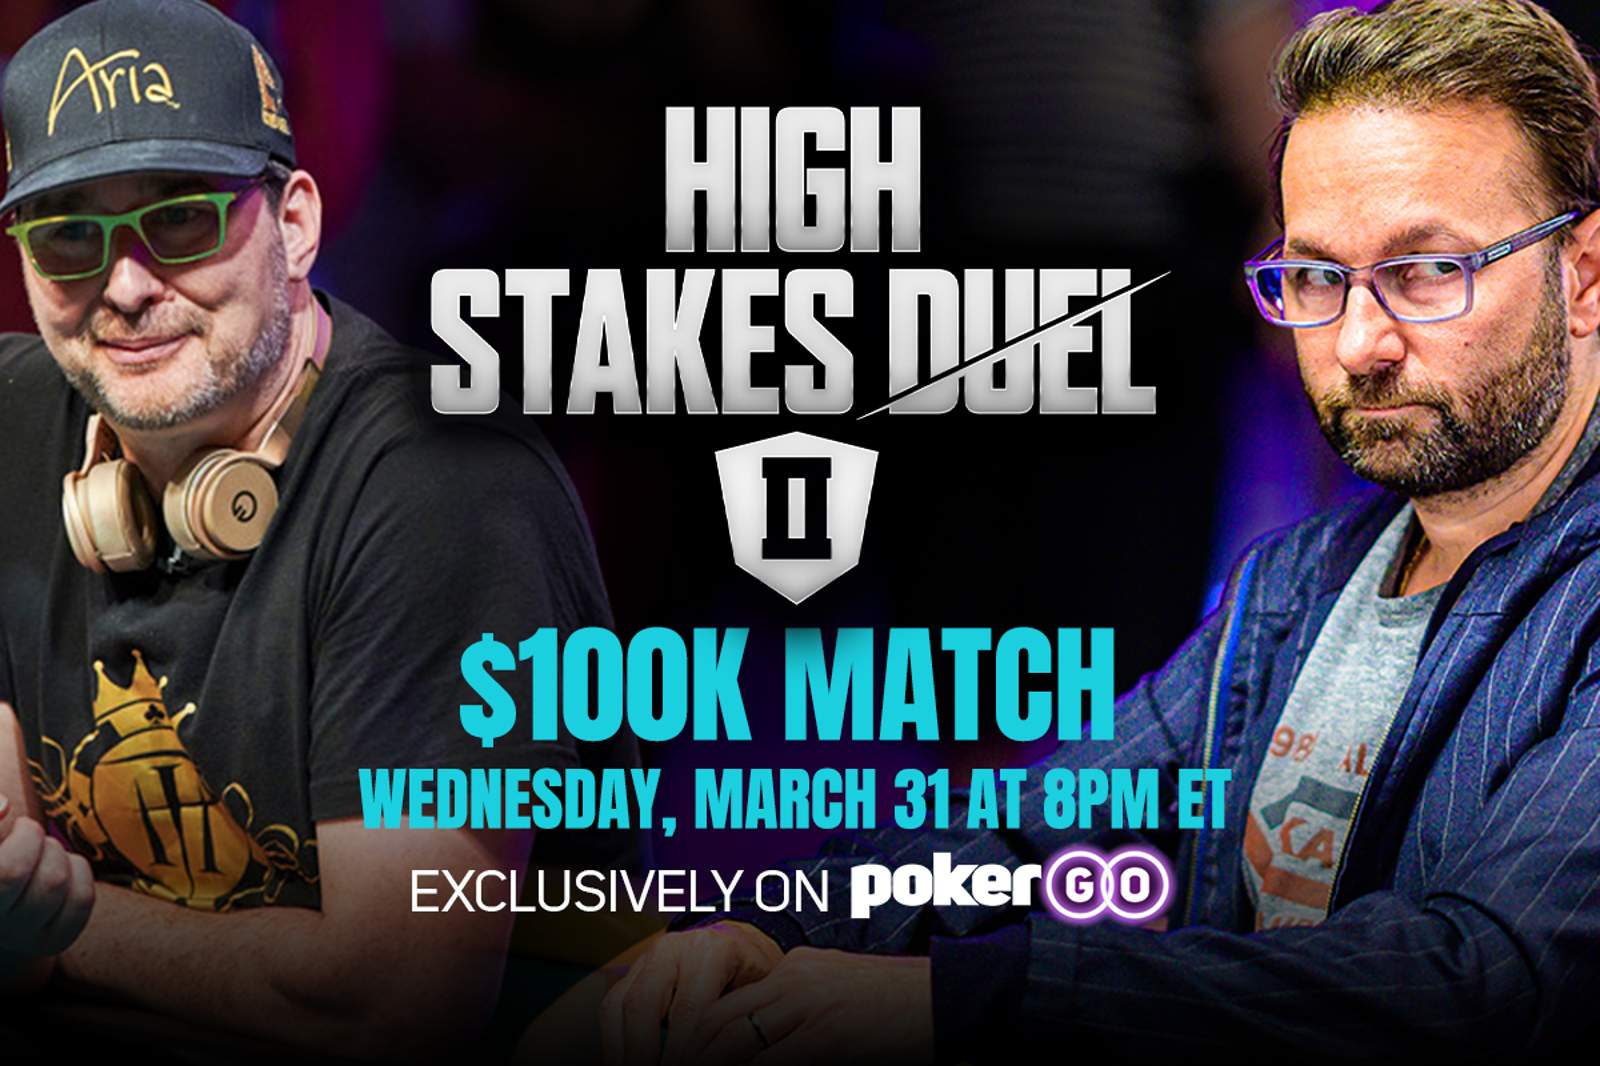 Phil Hellmuth and Daniel Negreanu Square Off on High Stakes Duel II for $100K